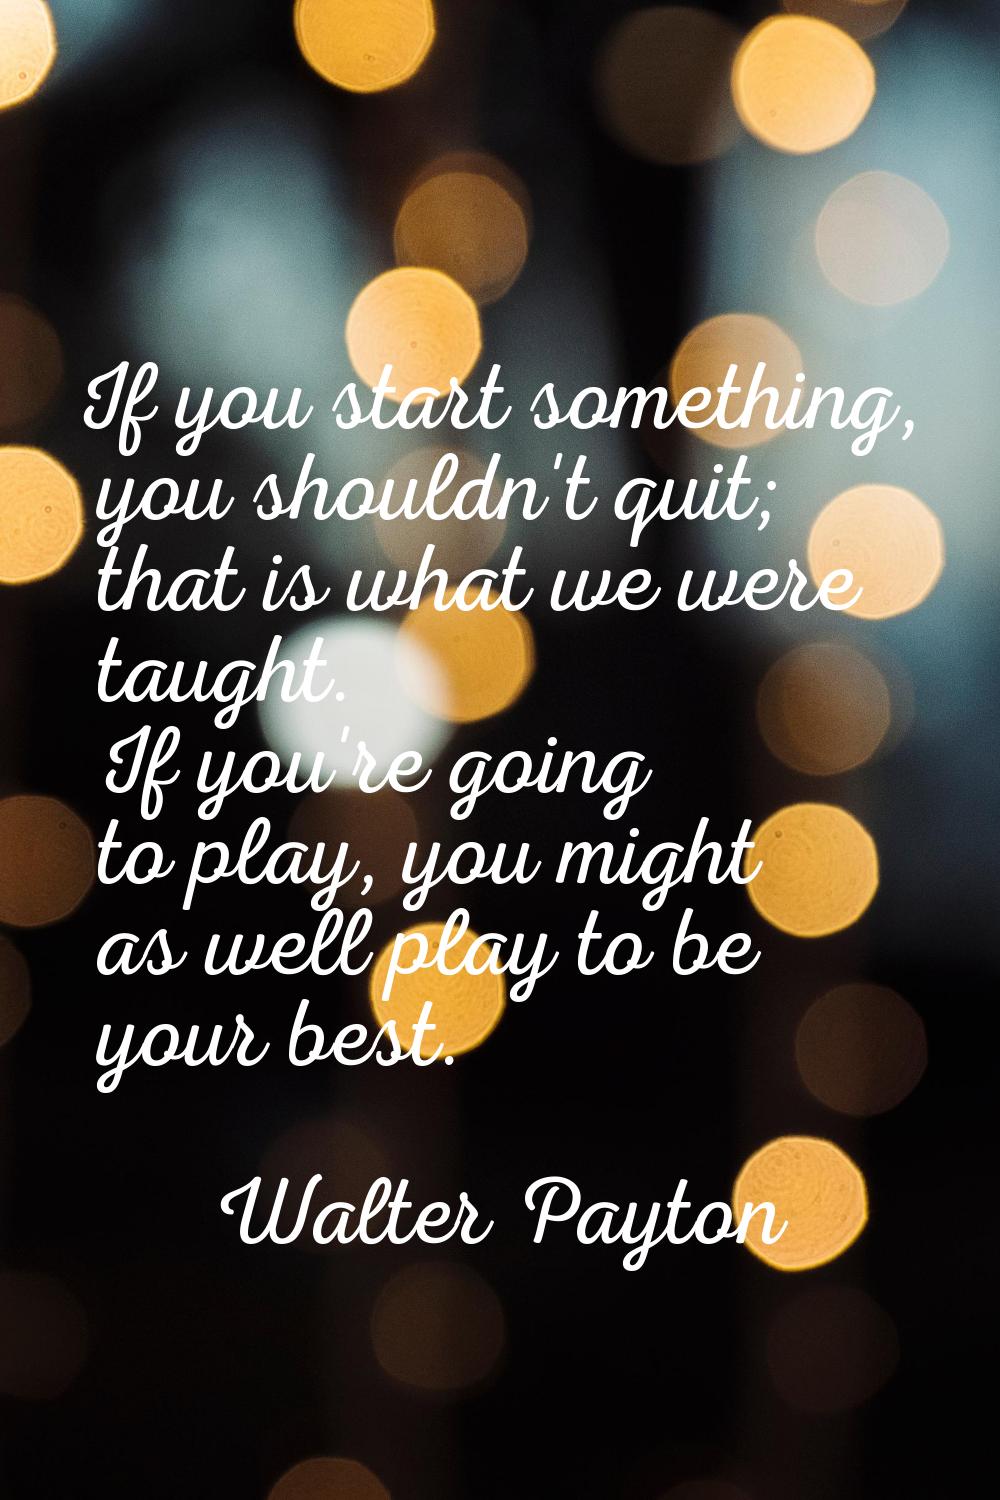 If you start something, you shouldn't quit; that is what we were taught. If you're going to play, y